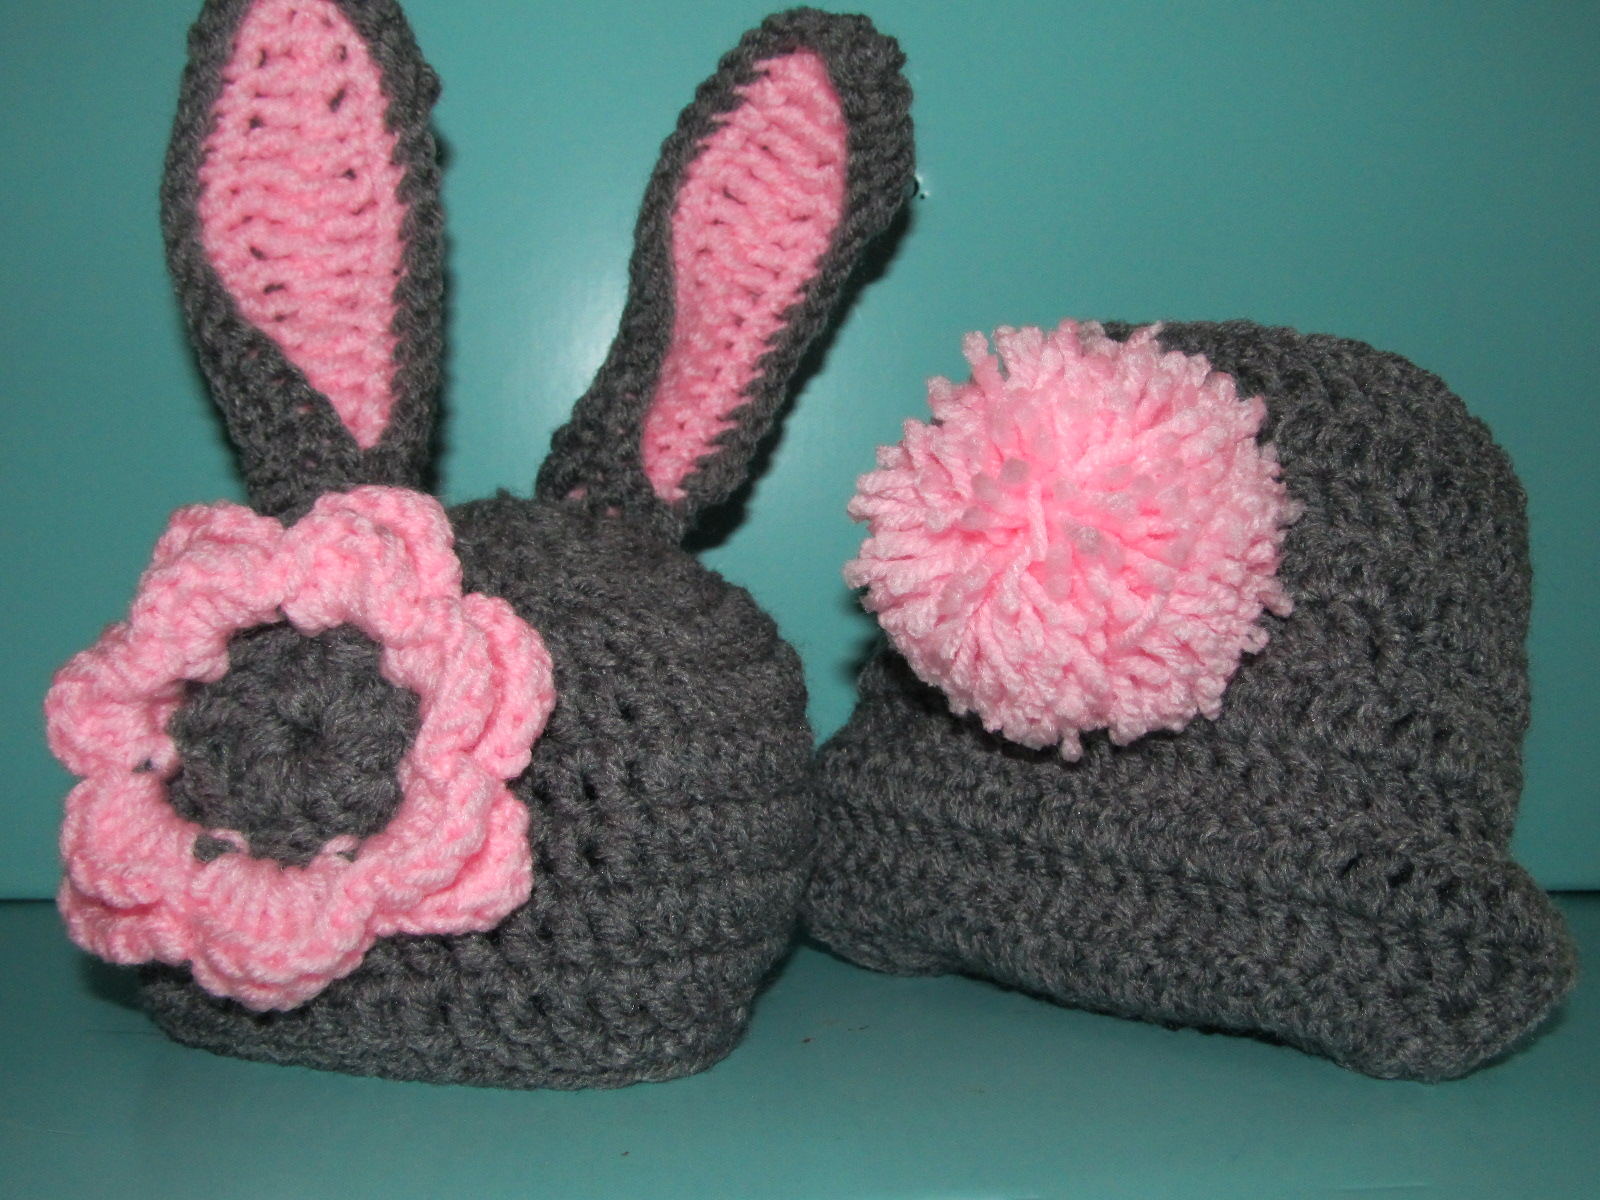 Baby Bunny Crochet Pattern Simply Crochet And Other Crafts Bunny Newborn Ba Prop